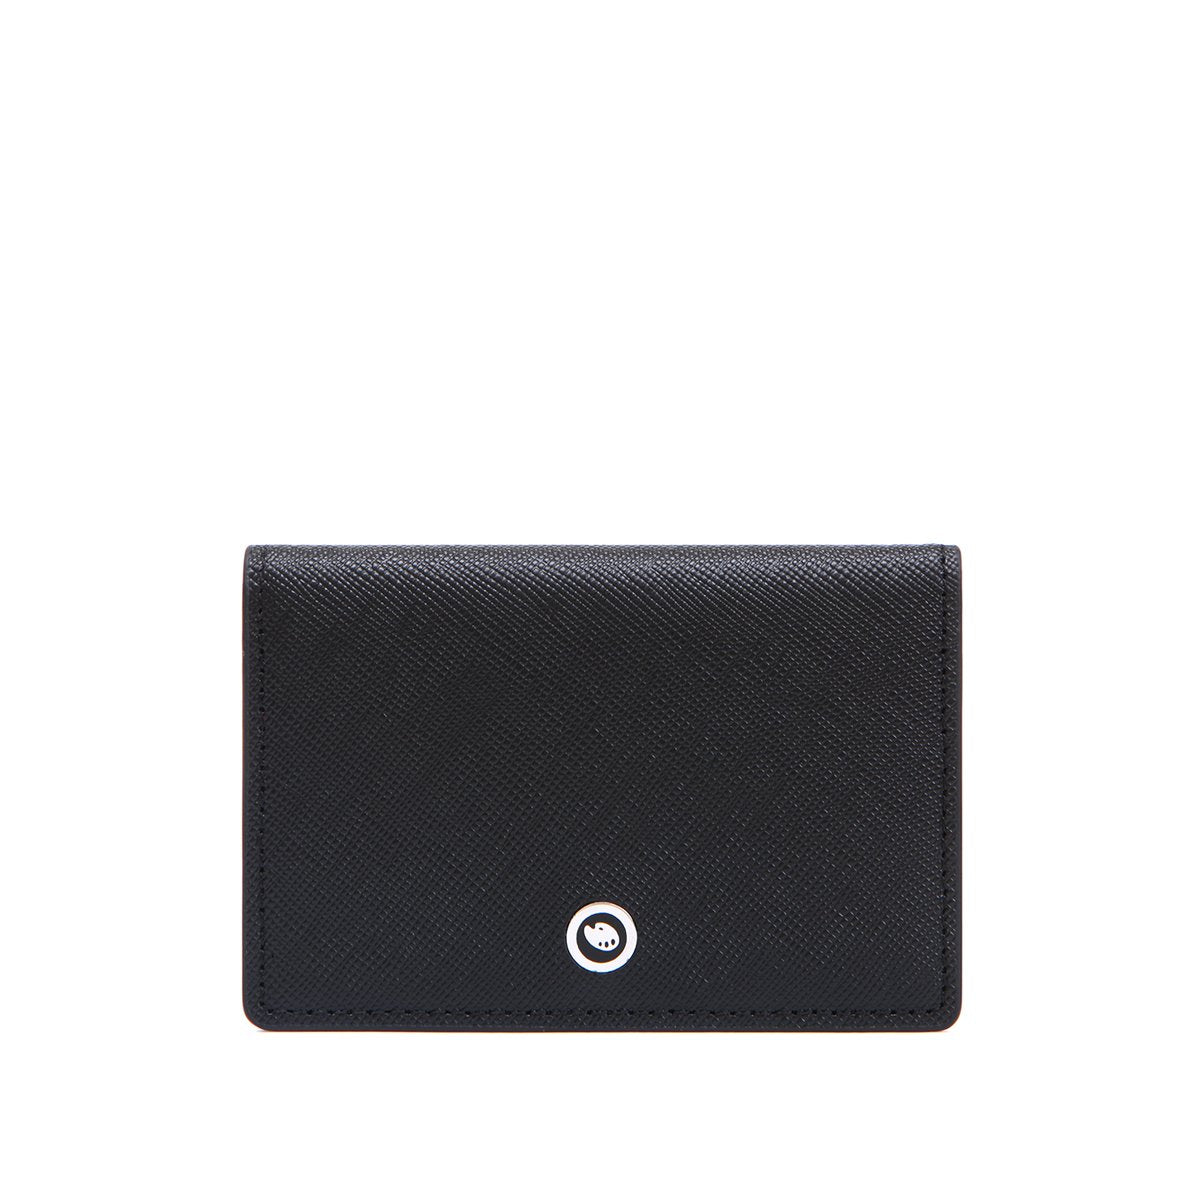 New Chanel business card holder